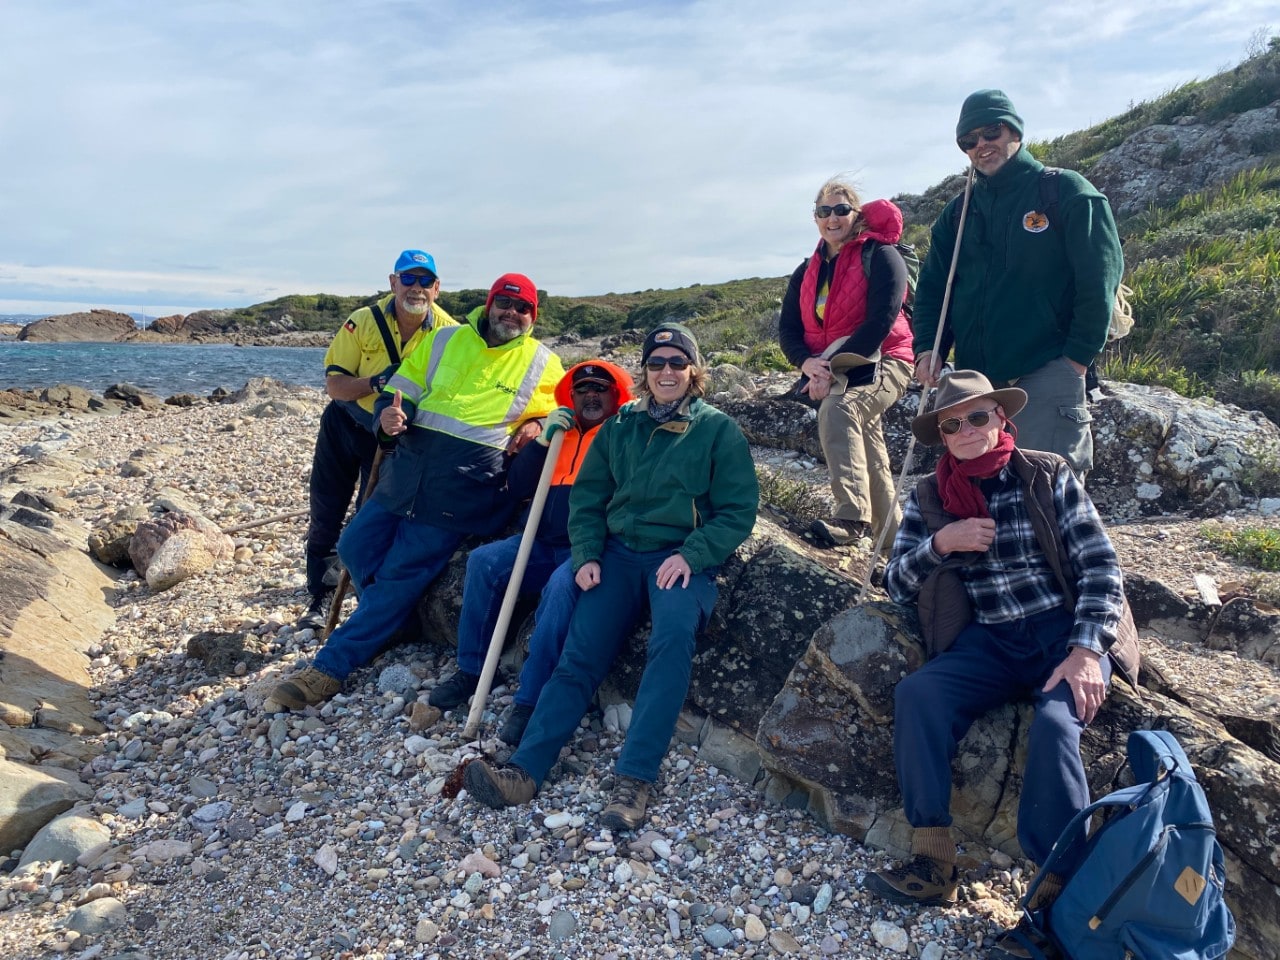 A small field team completed the first systematic cultural heritage survey of Broughton Island in 2021